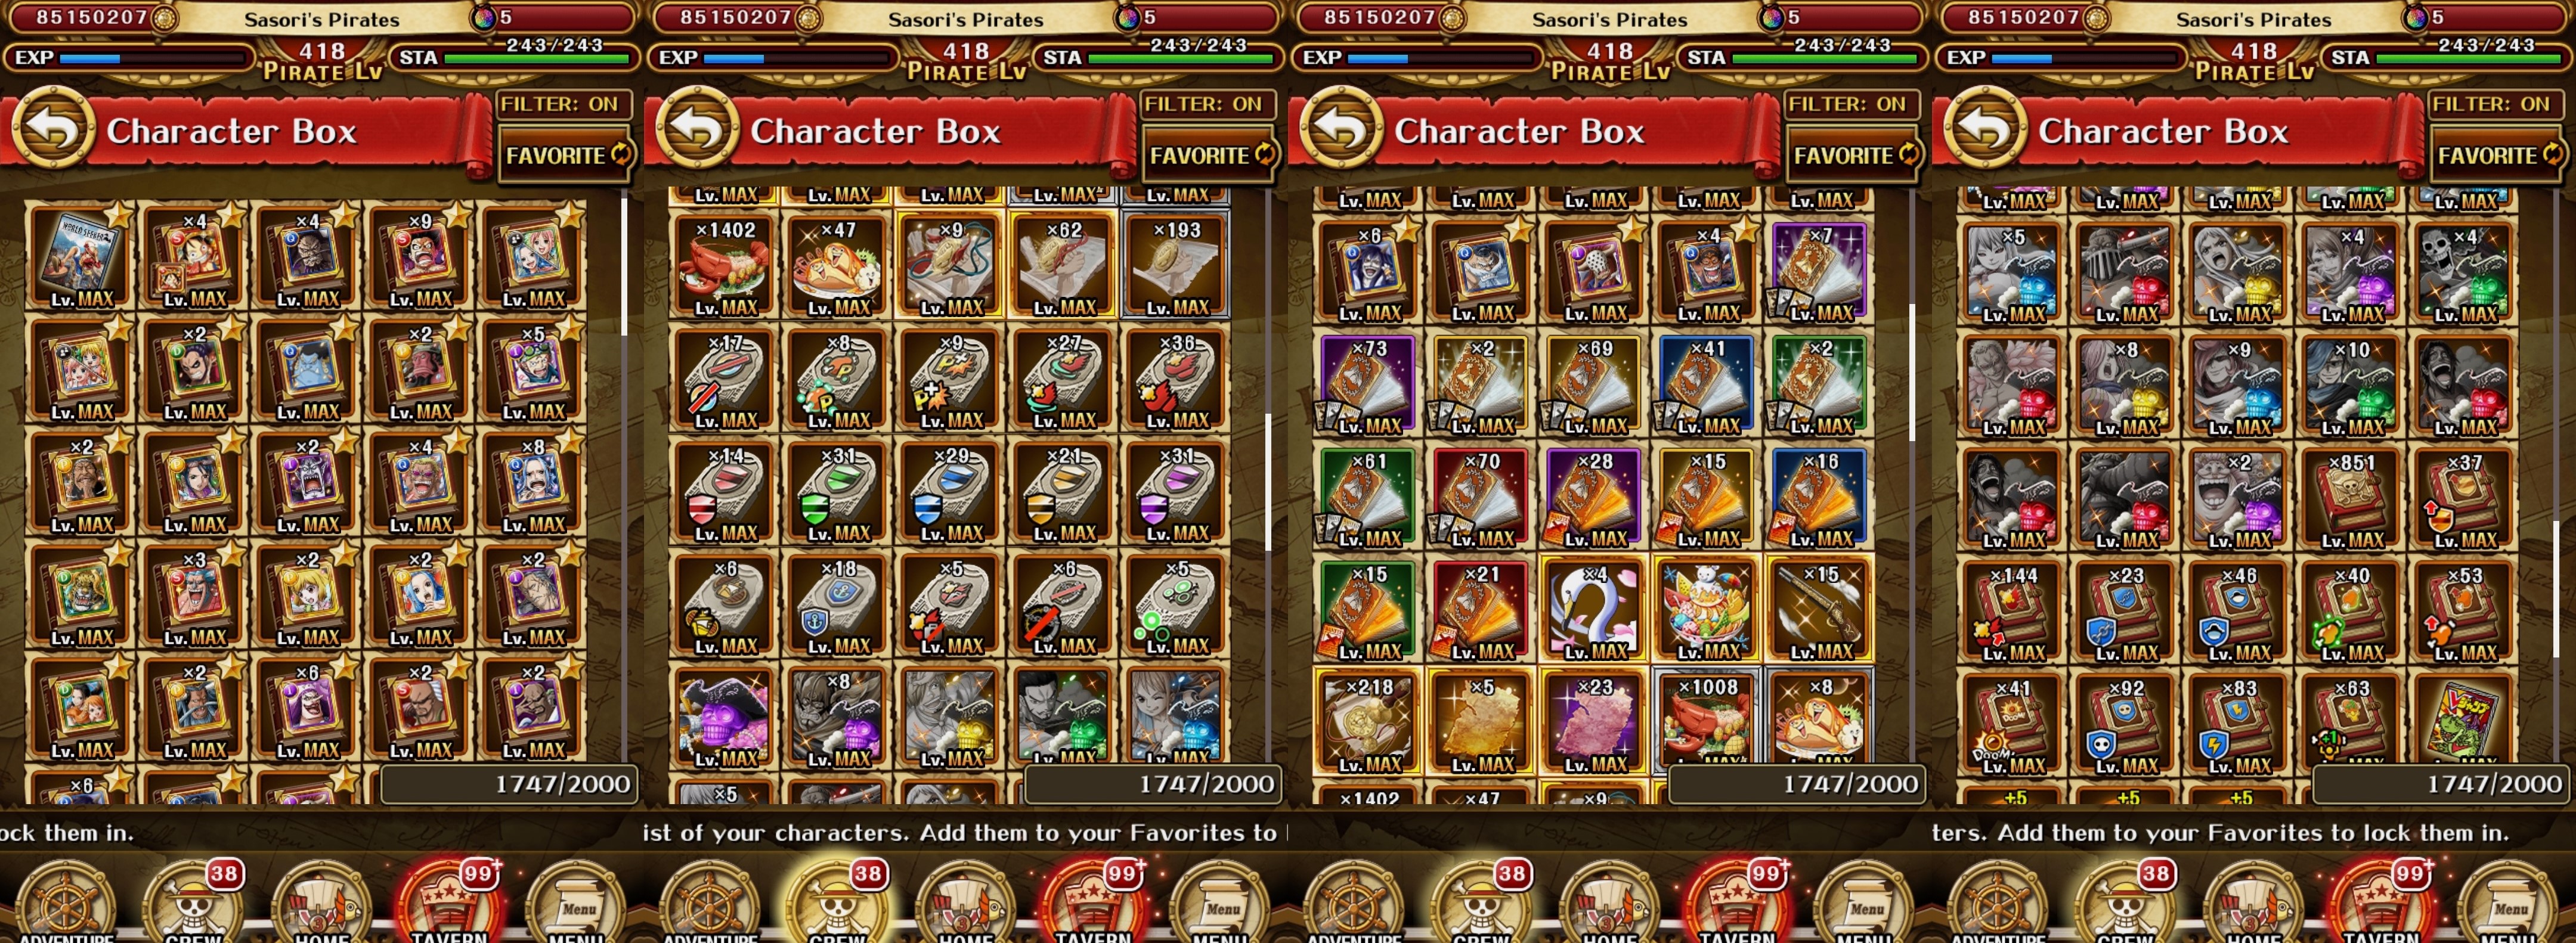 Selling - One Piece Treasure Cruise account PLVL 418, 100 USD, new 